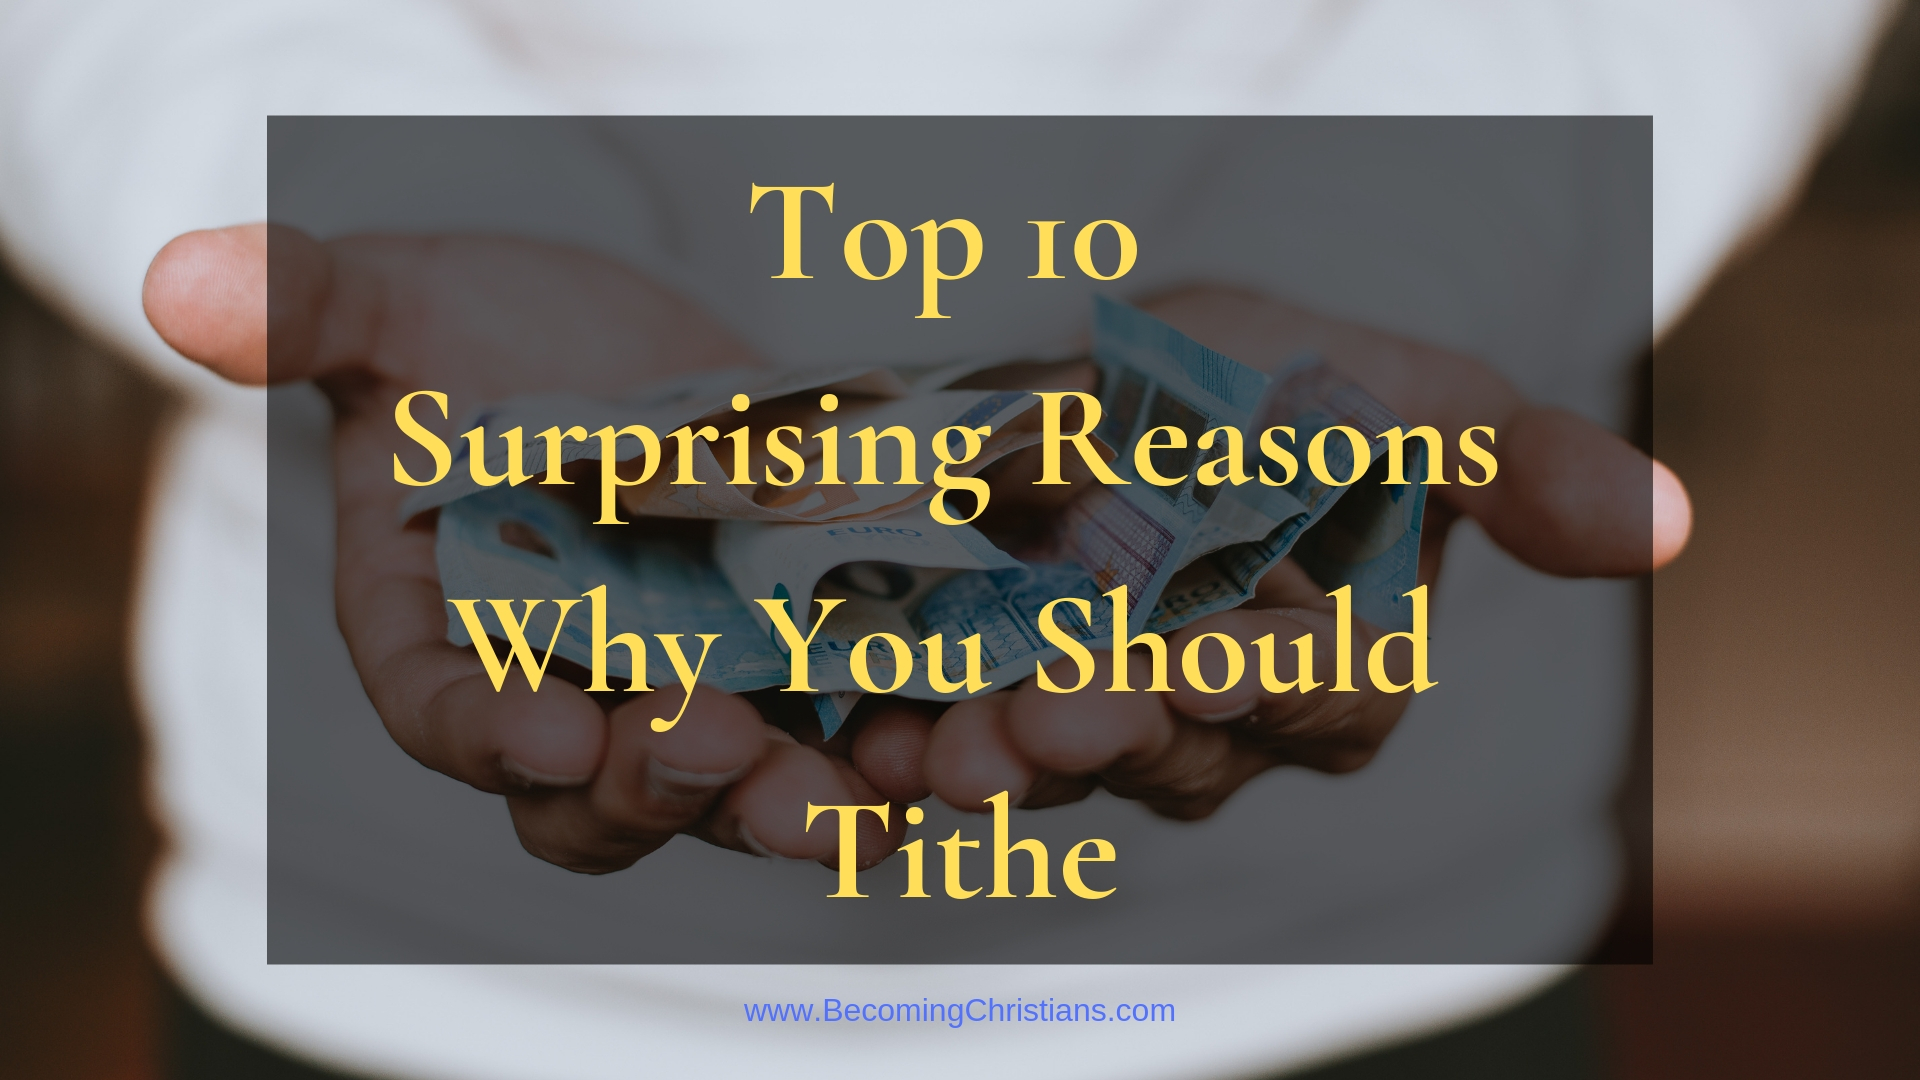 Top 10 Surprising Reasons Why You Should Tithe